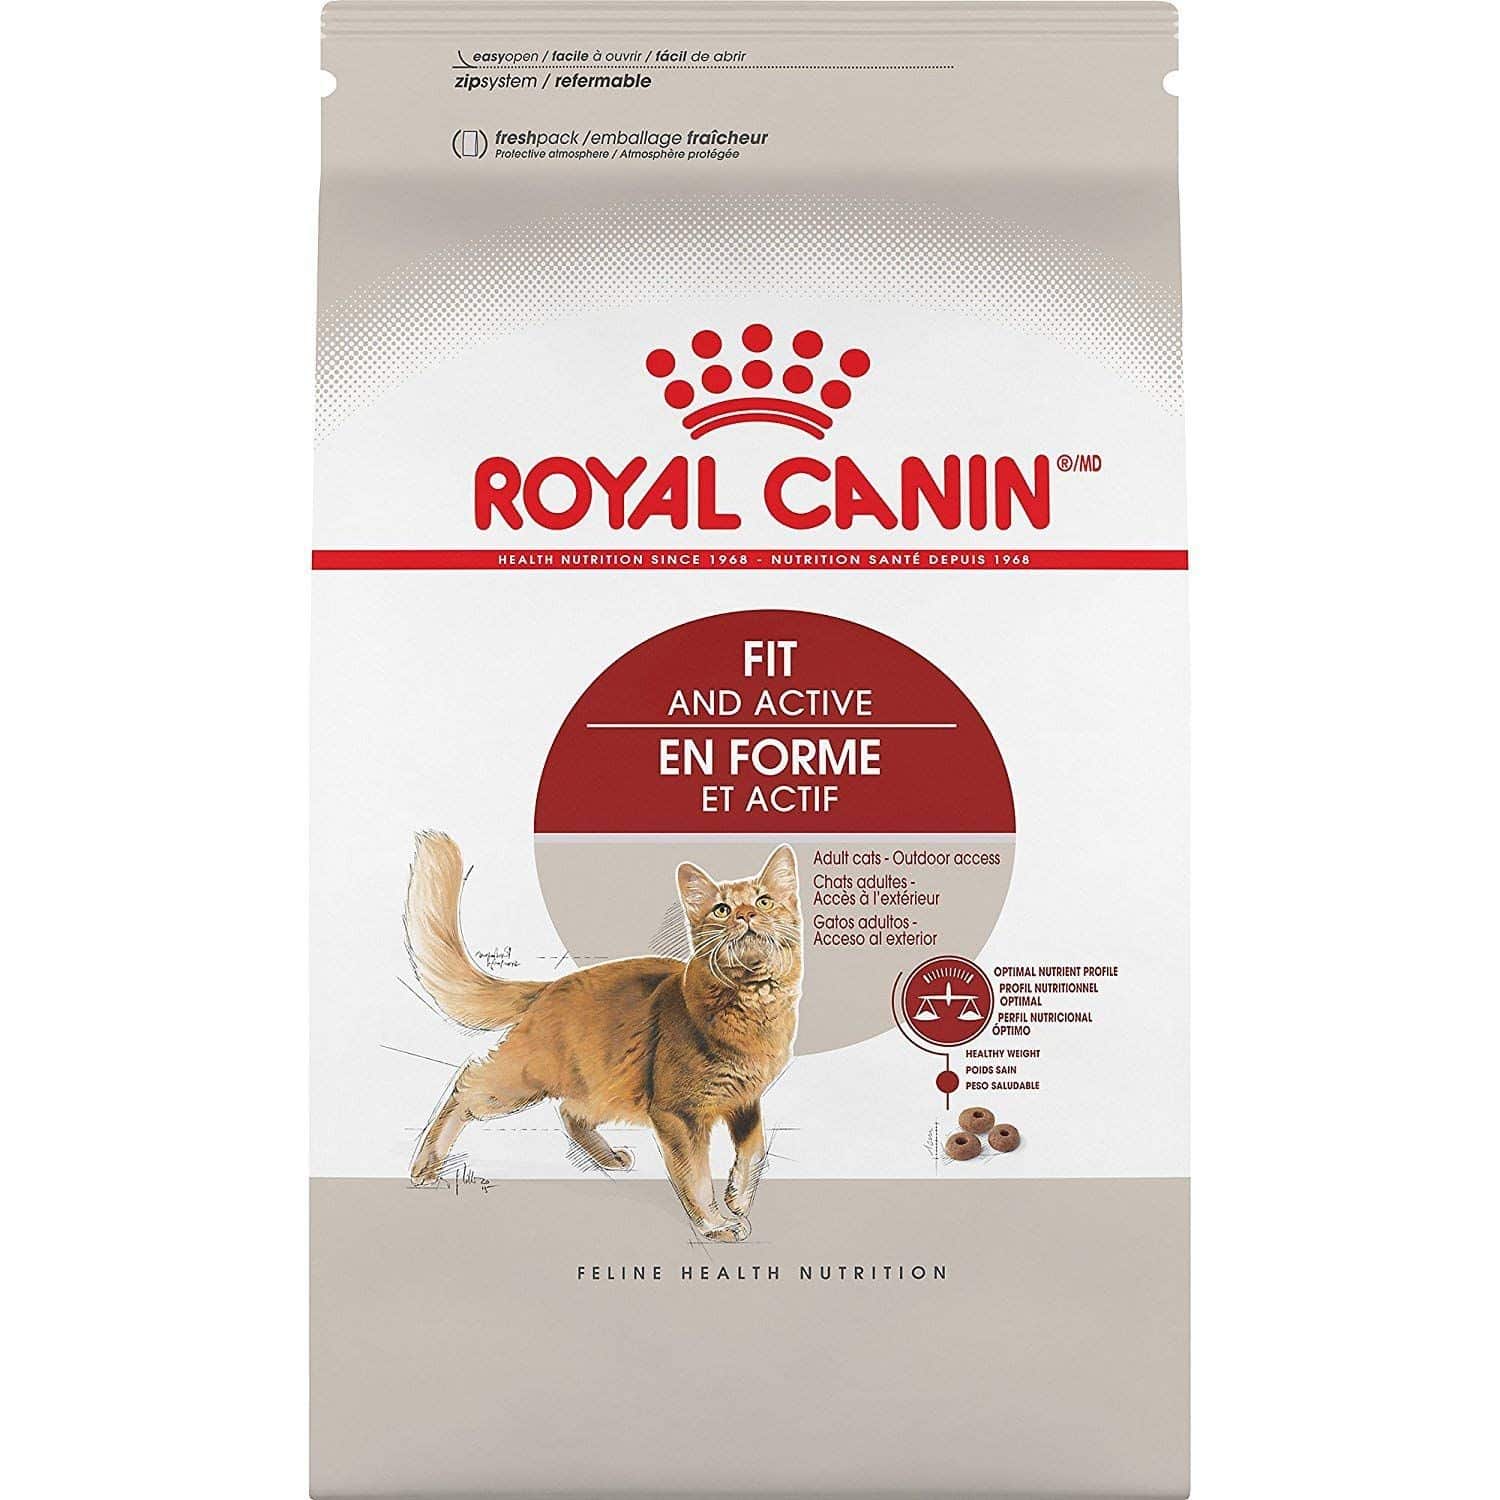 Royal Canin Kidney Care Cat Food